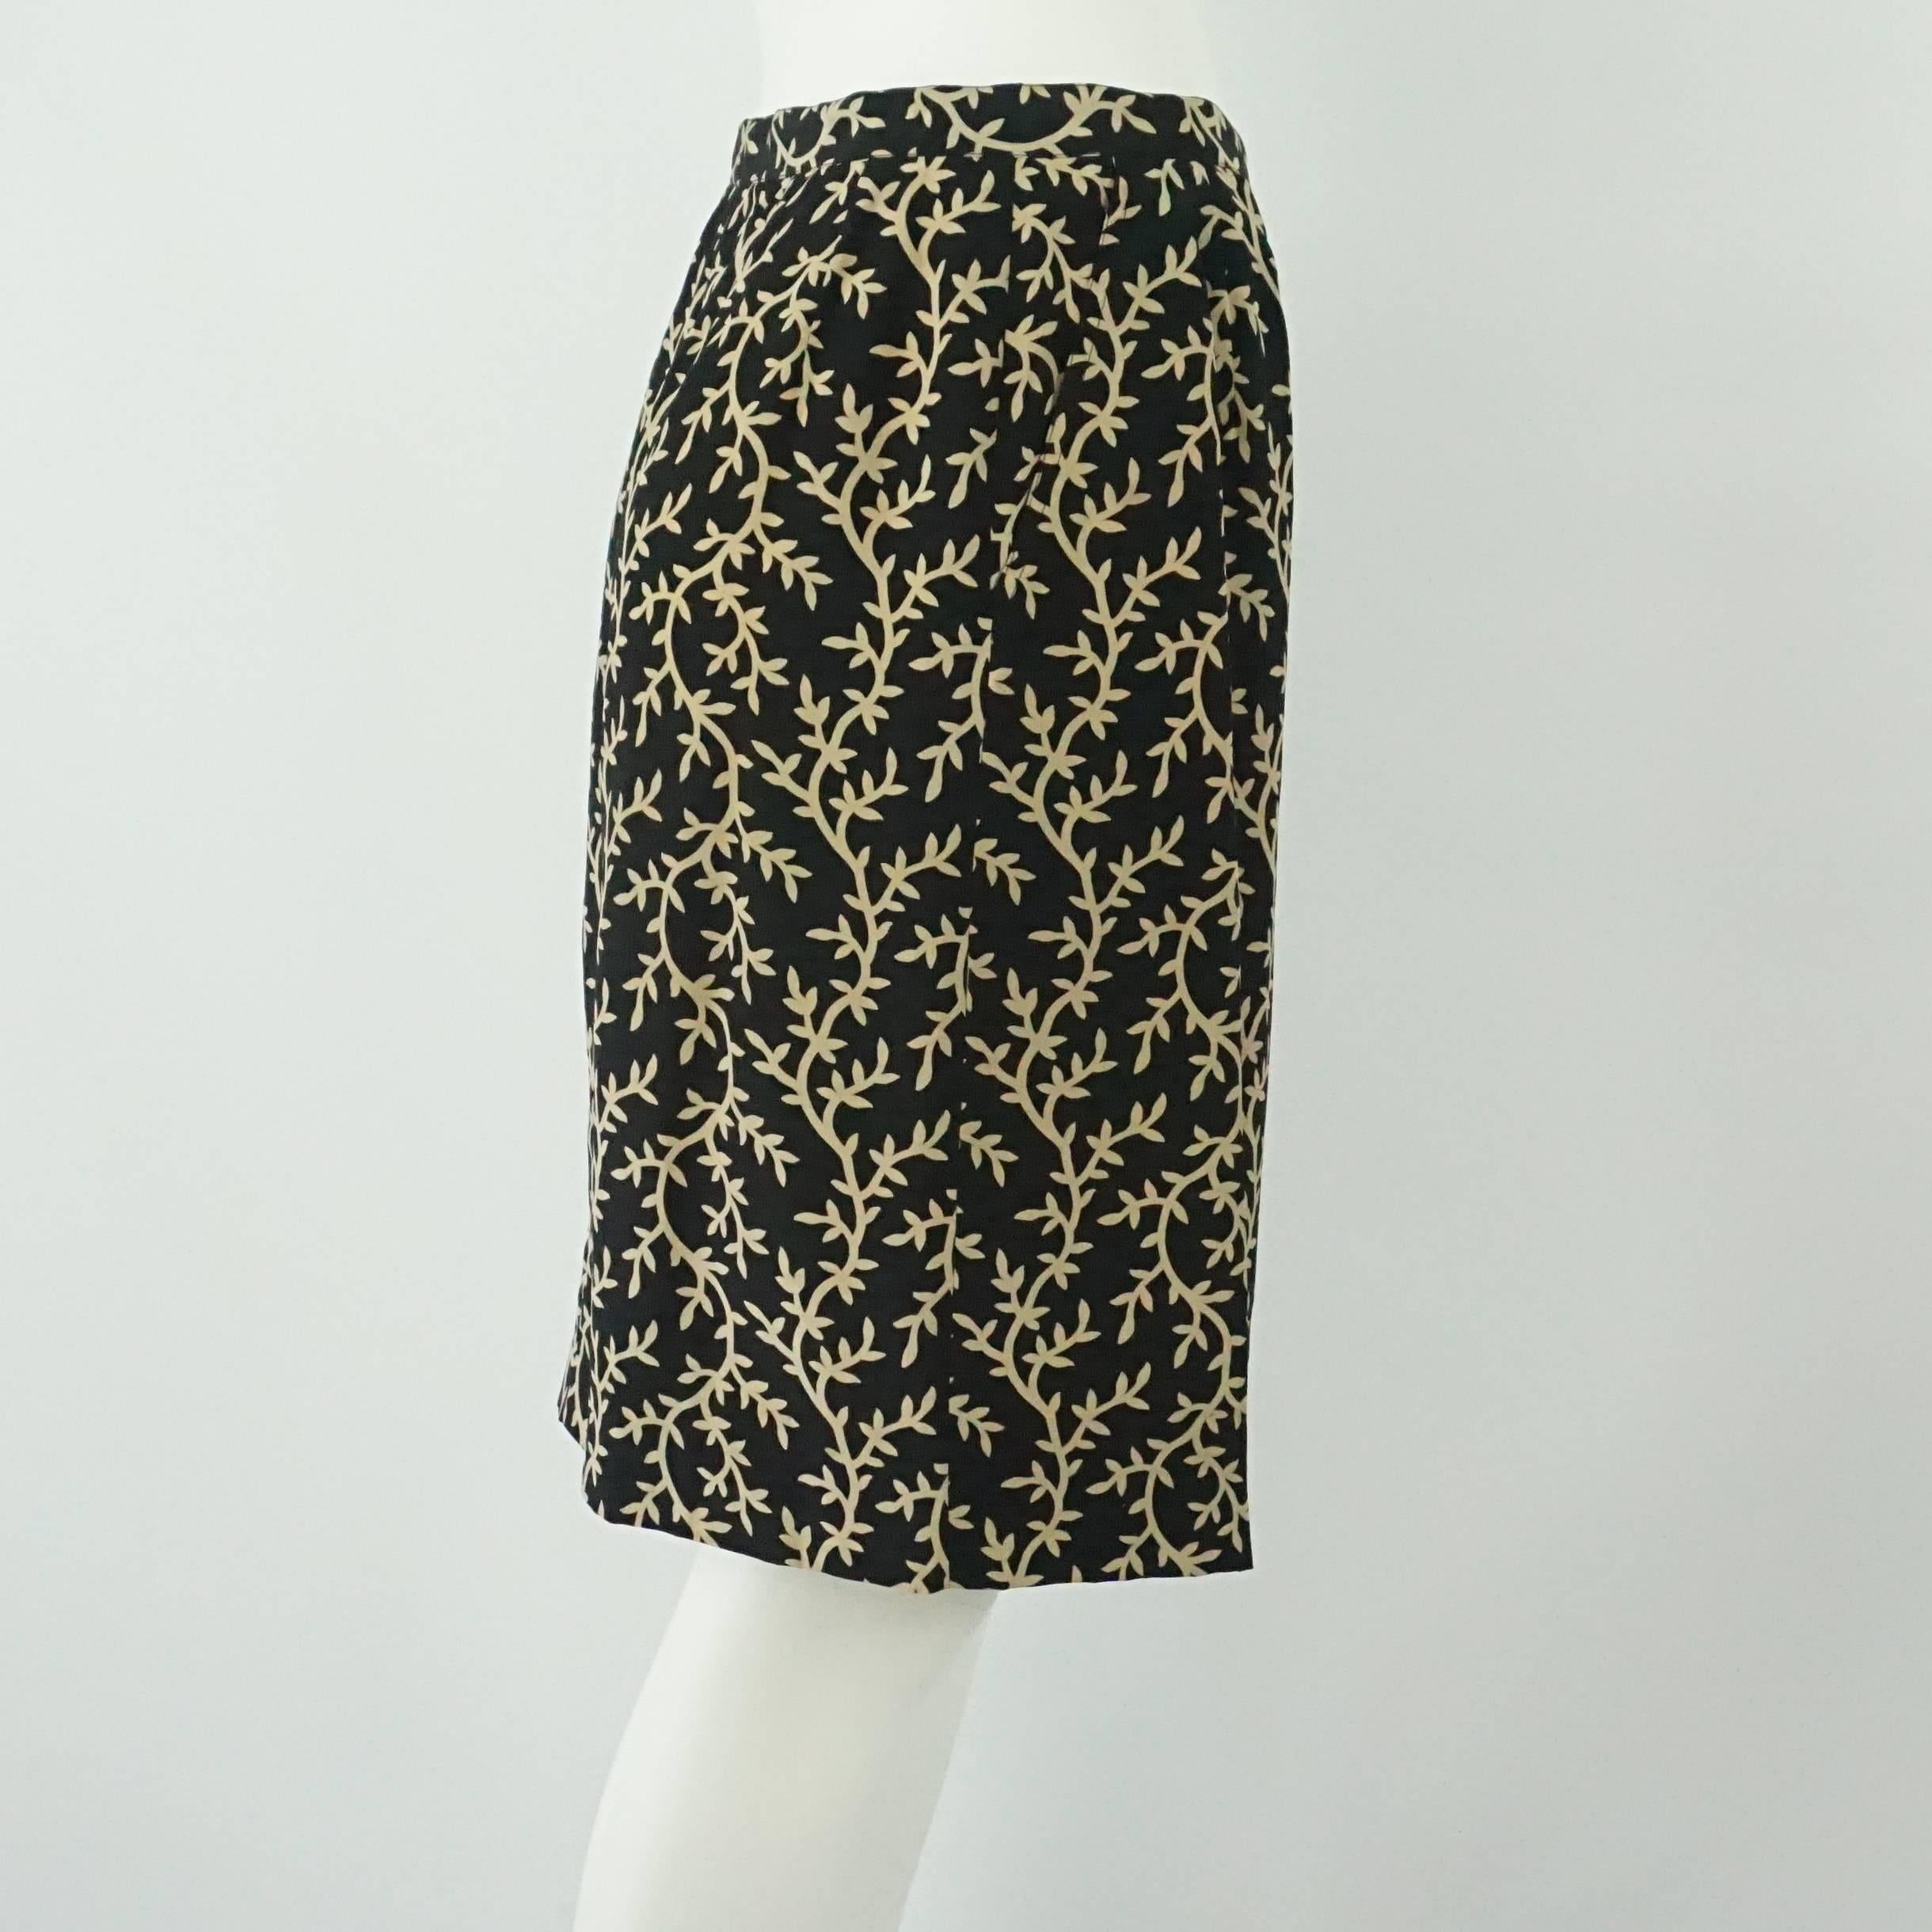 Chanel Black and Tan Skirt - M. This Chanel skirt is black with a tan branching design. It has a gold button and a straight skirt style. This skirt is in excellent condition. Size M.
Measurements
Waist: 28